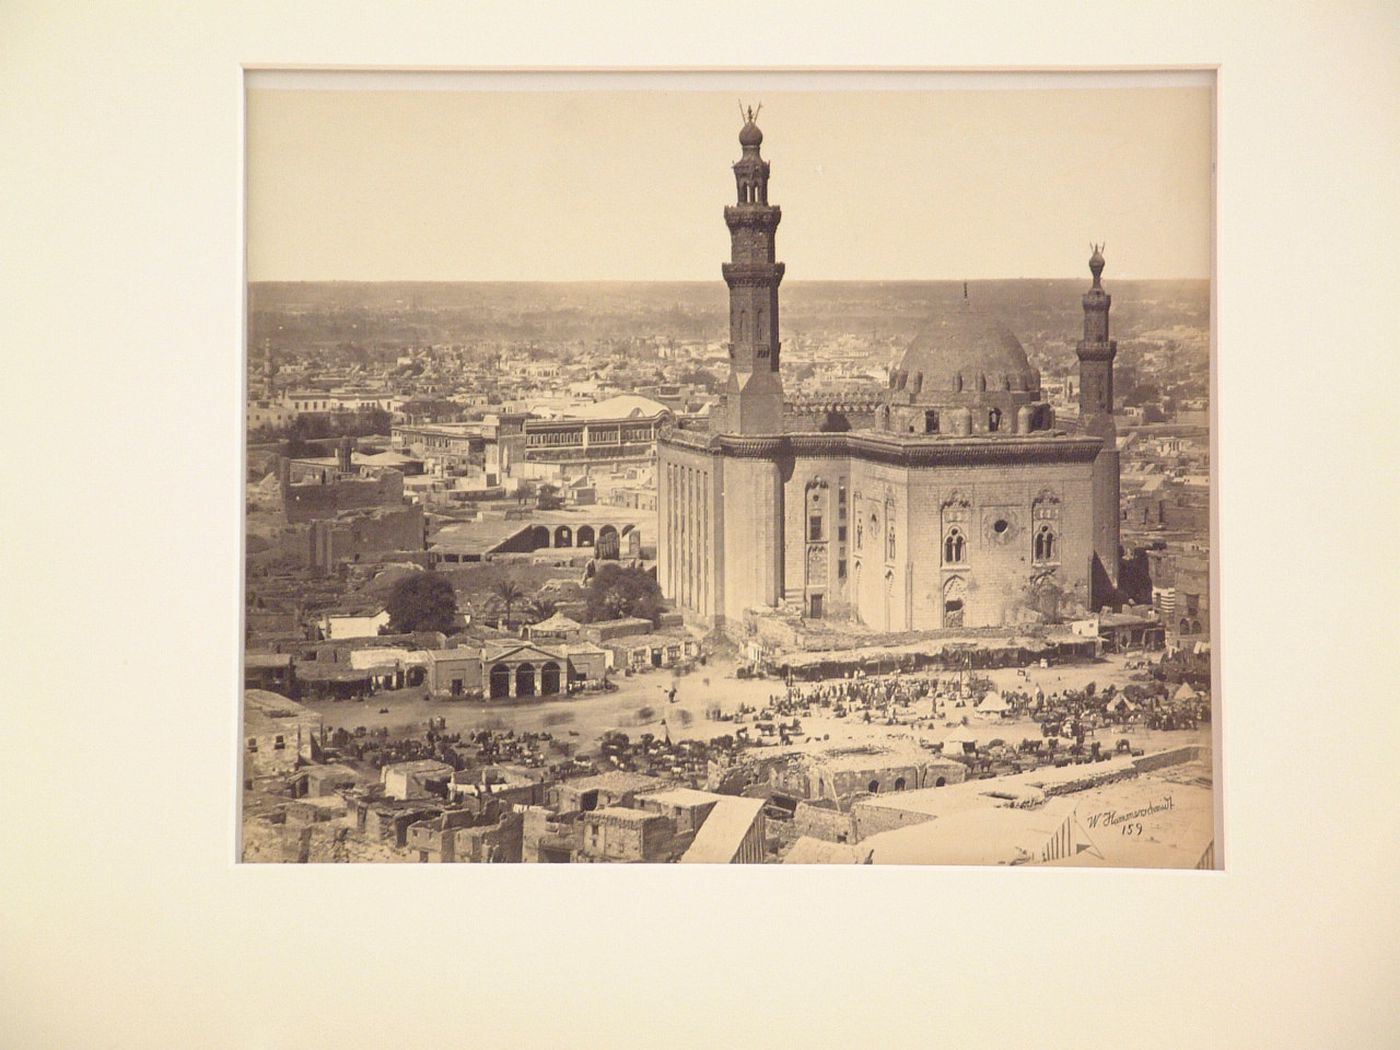 View of the Sultan Hassan Mosque from Citadel, Cairo, Egypt